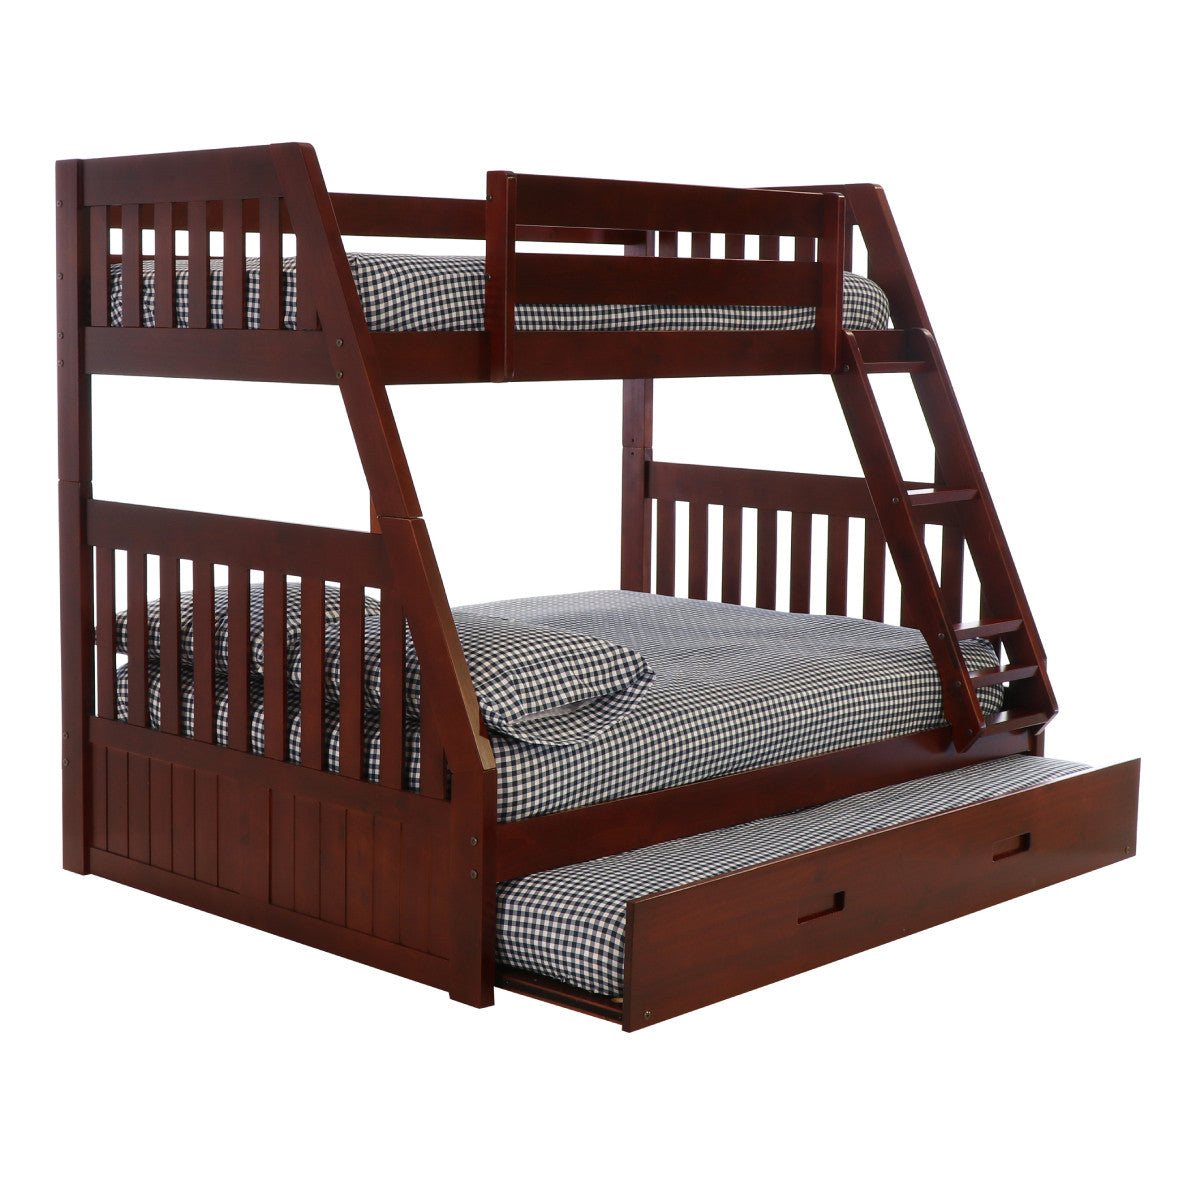 TWIN/FULL MISSION BUNK BED WITH TWIN TRUNDLE BED IN MERLOT FINISH